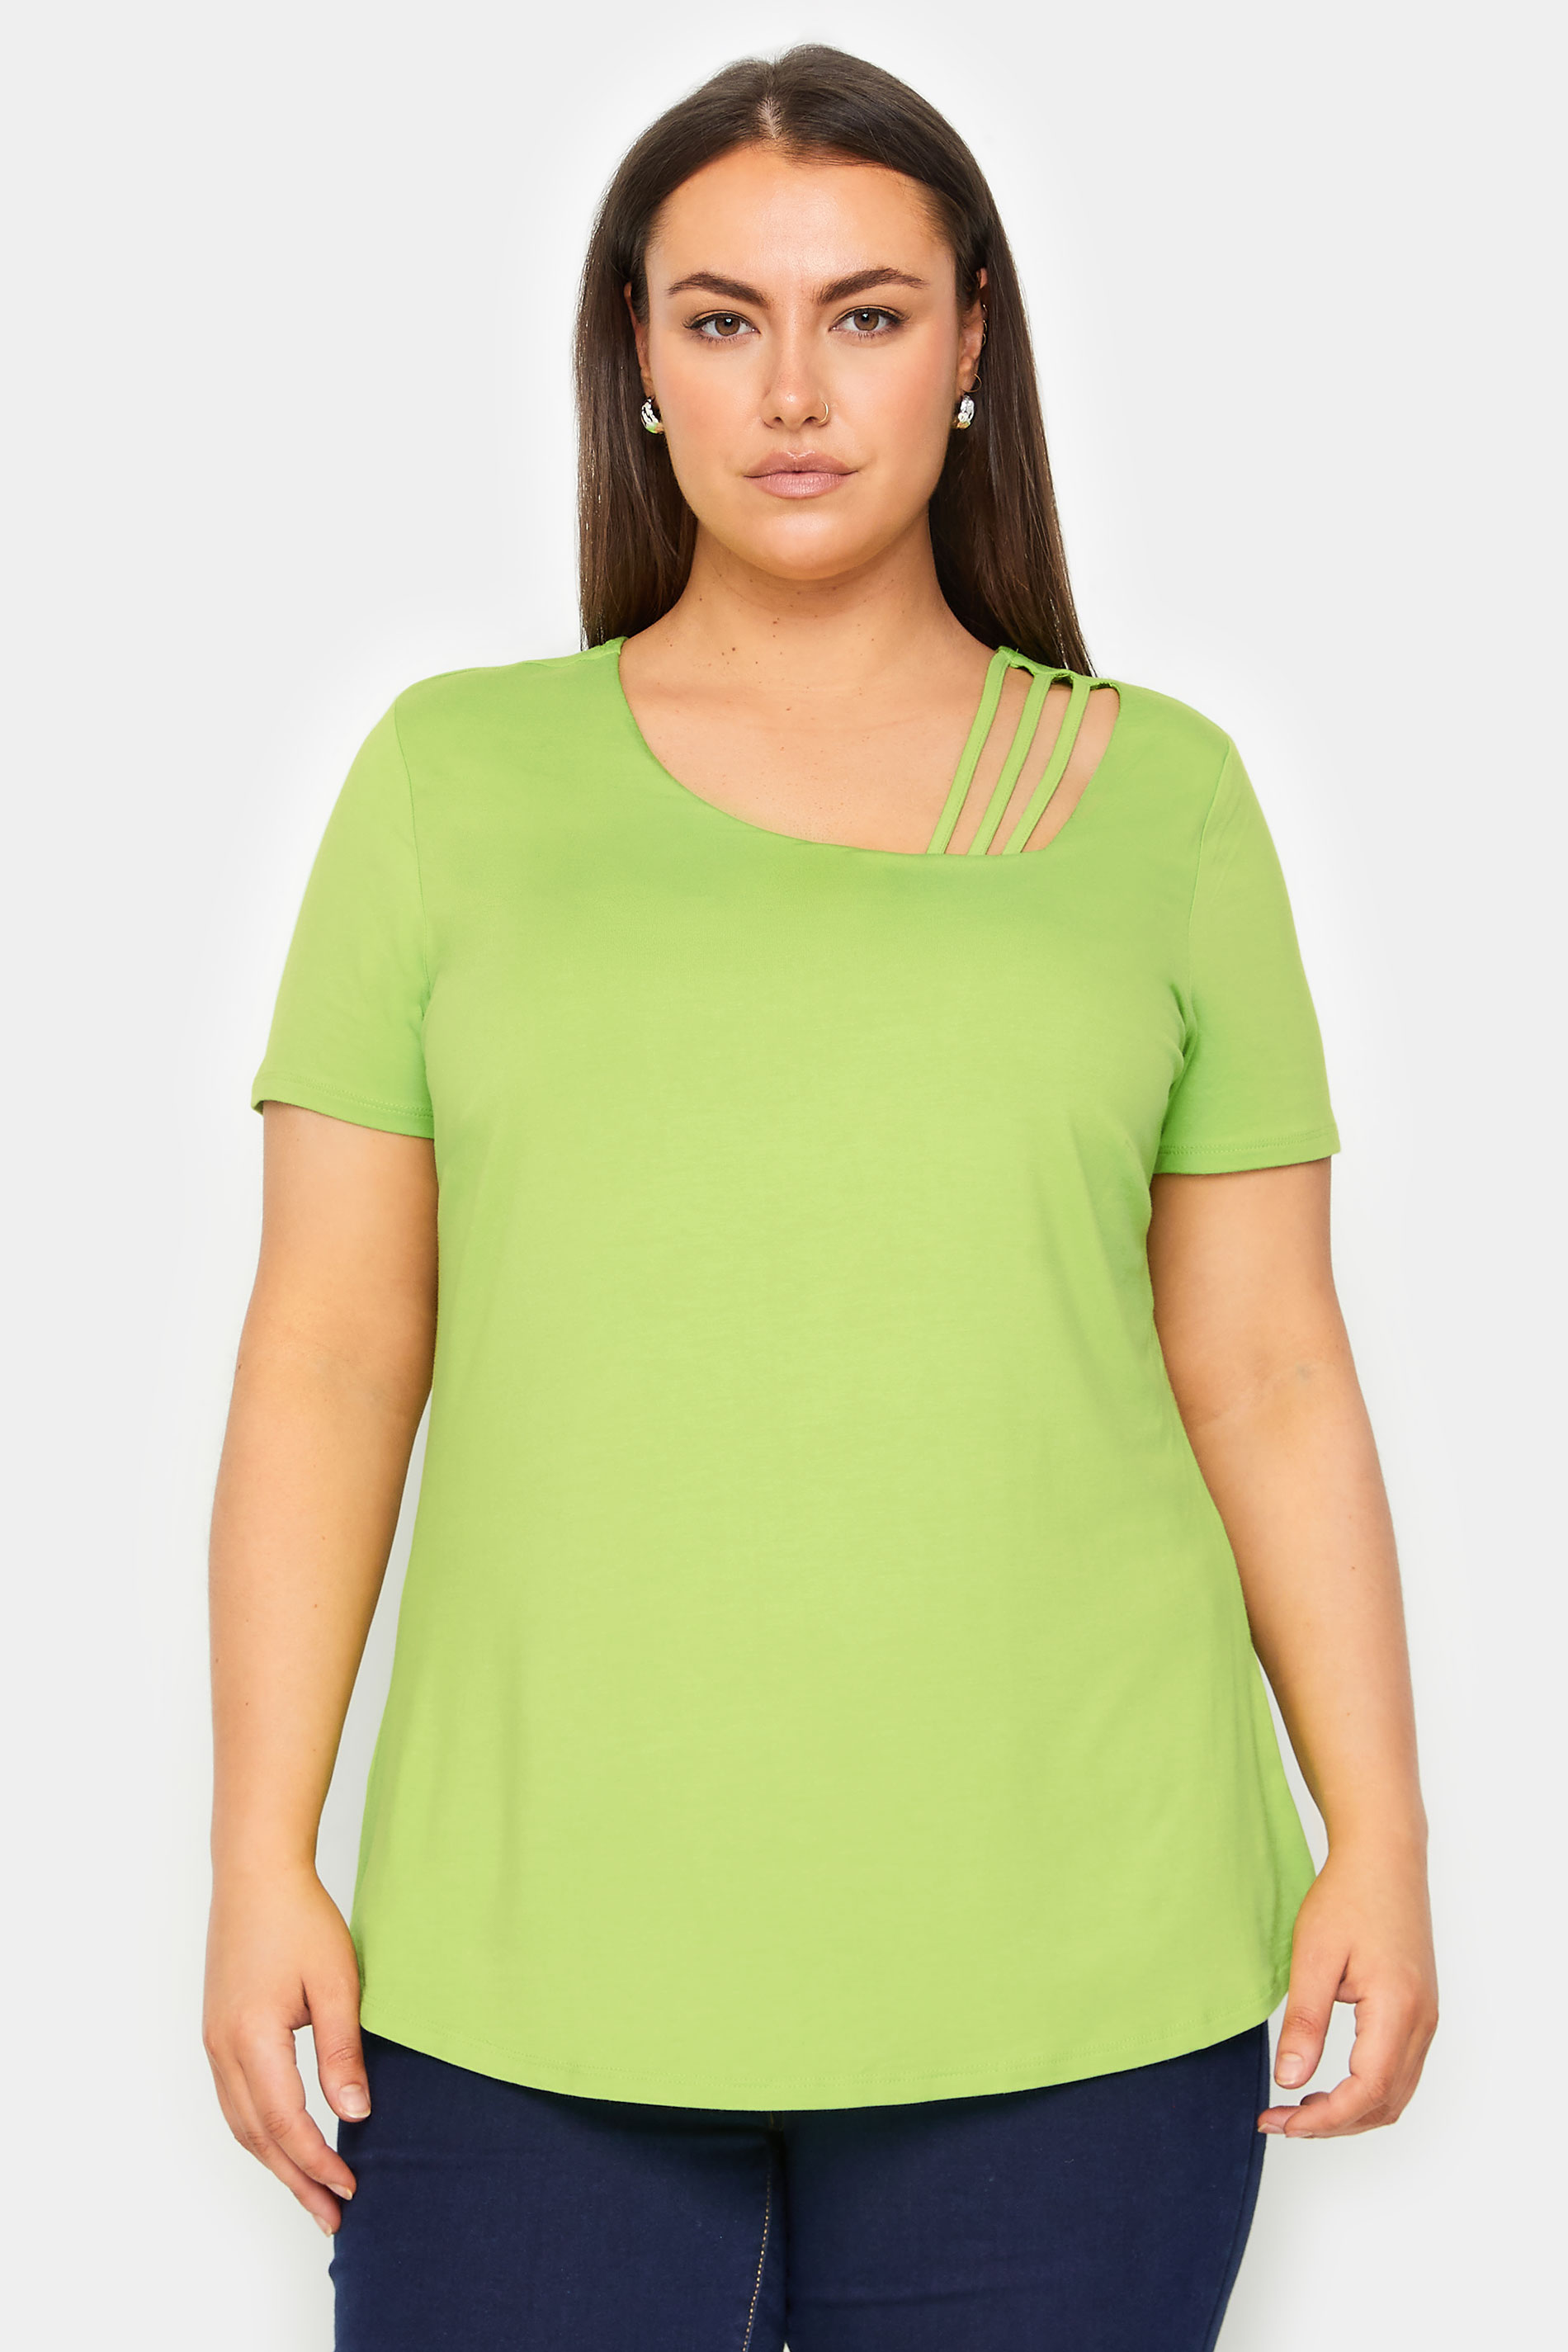 Evans Lime Green Cut Out T-Shirt 1